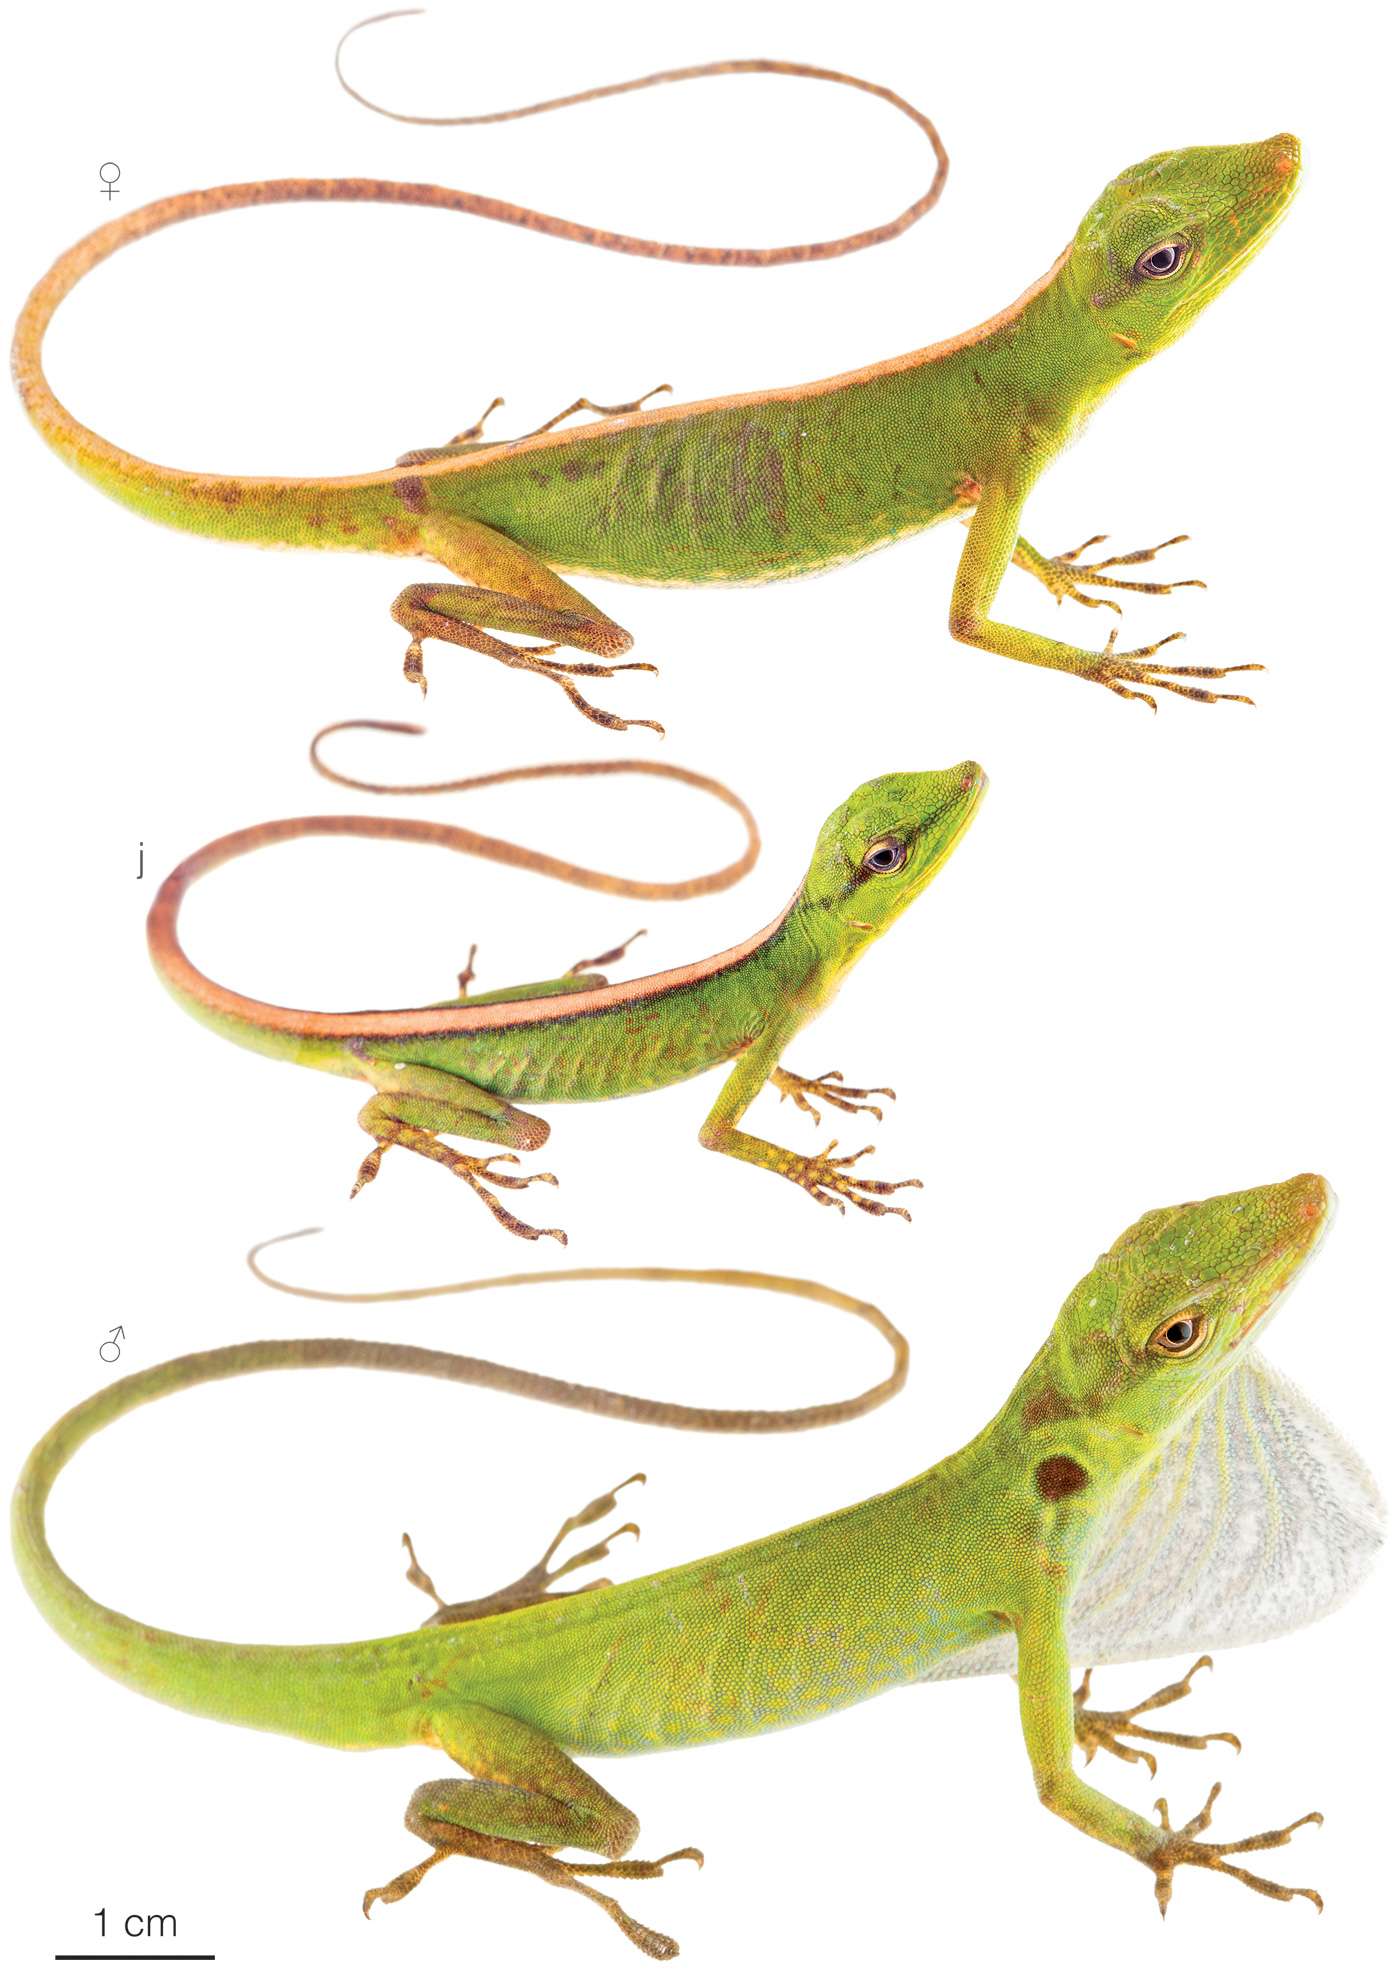 Figure showing variation among individuals of Anolis soinii